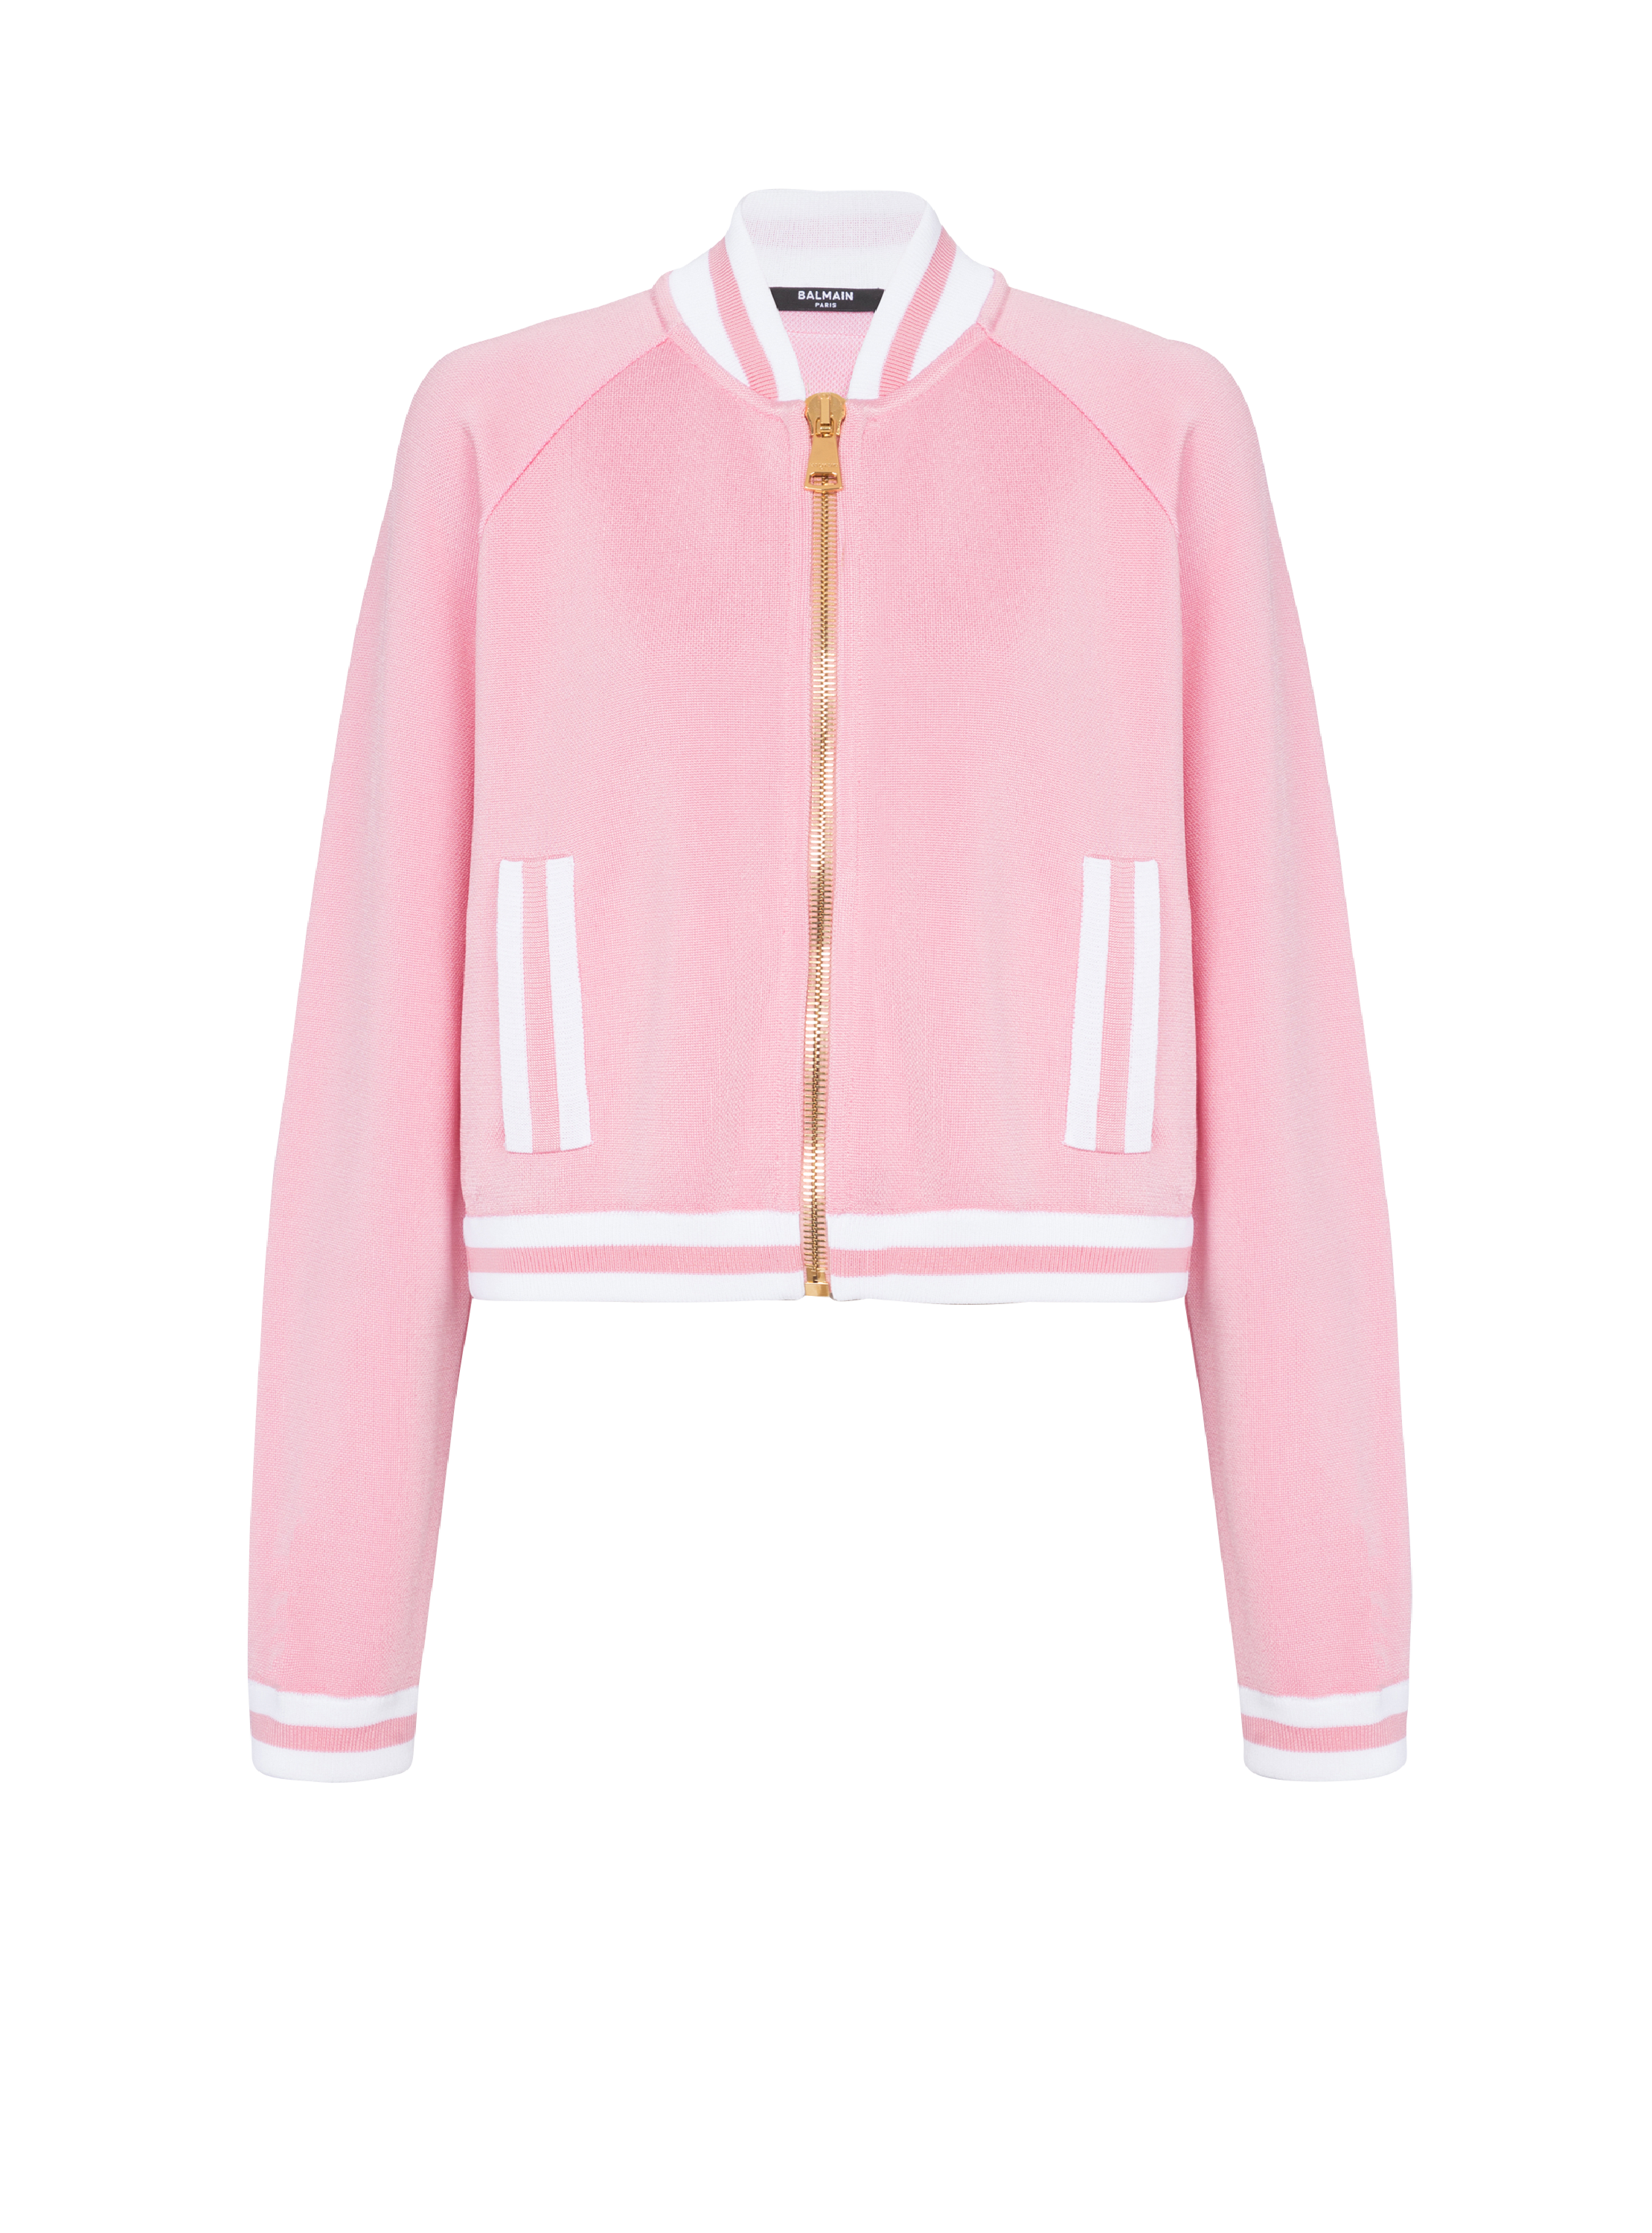 Cropped knitted varsity jacket with striped details, pink, hi-res